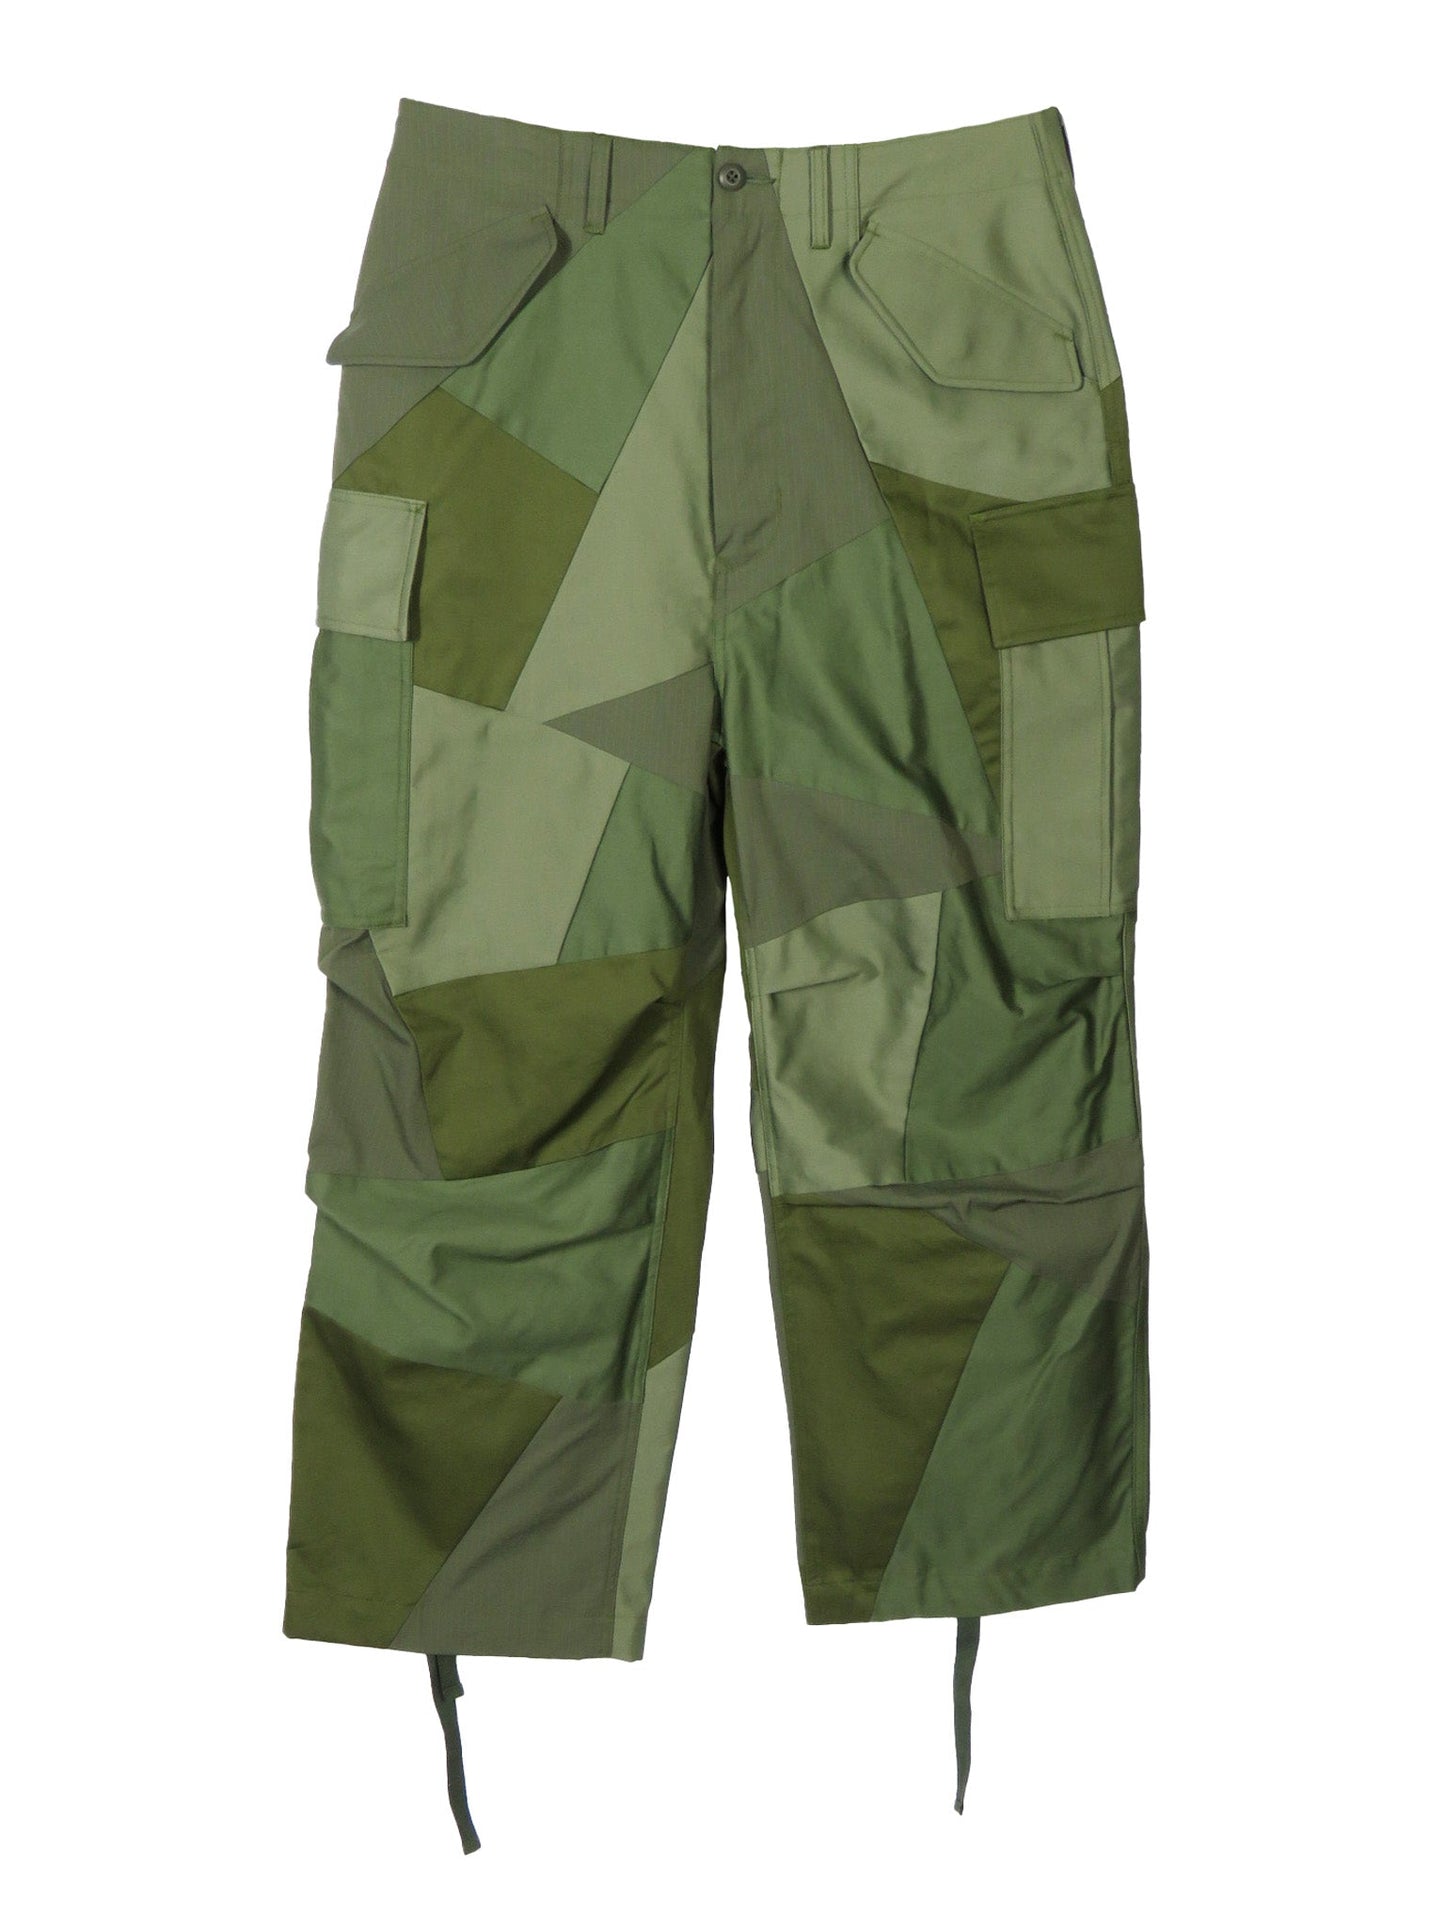 ANREALAGE PANEL PATCHWORK CARGO PANTS